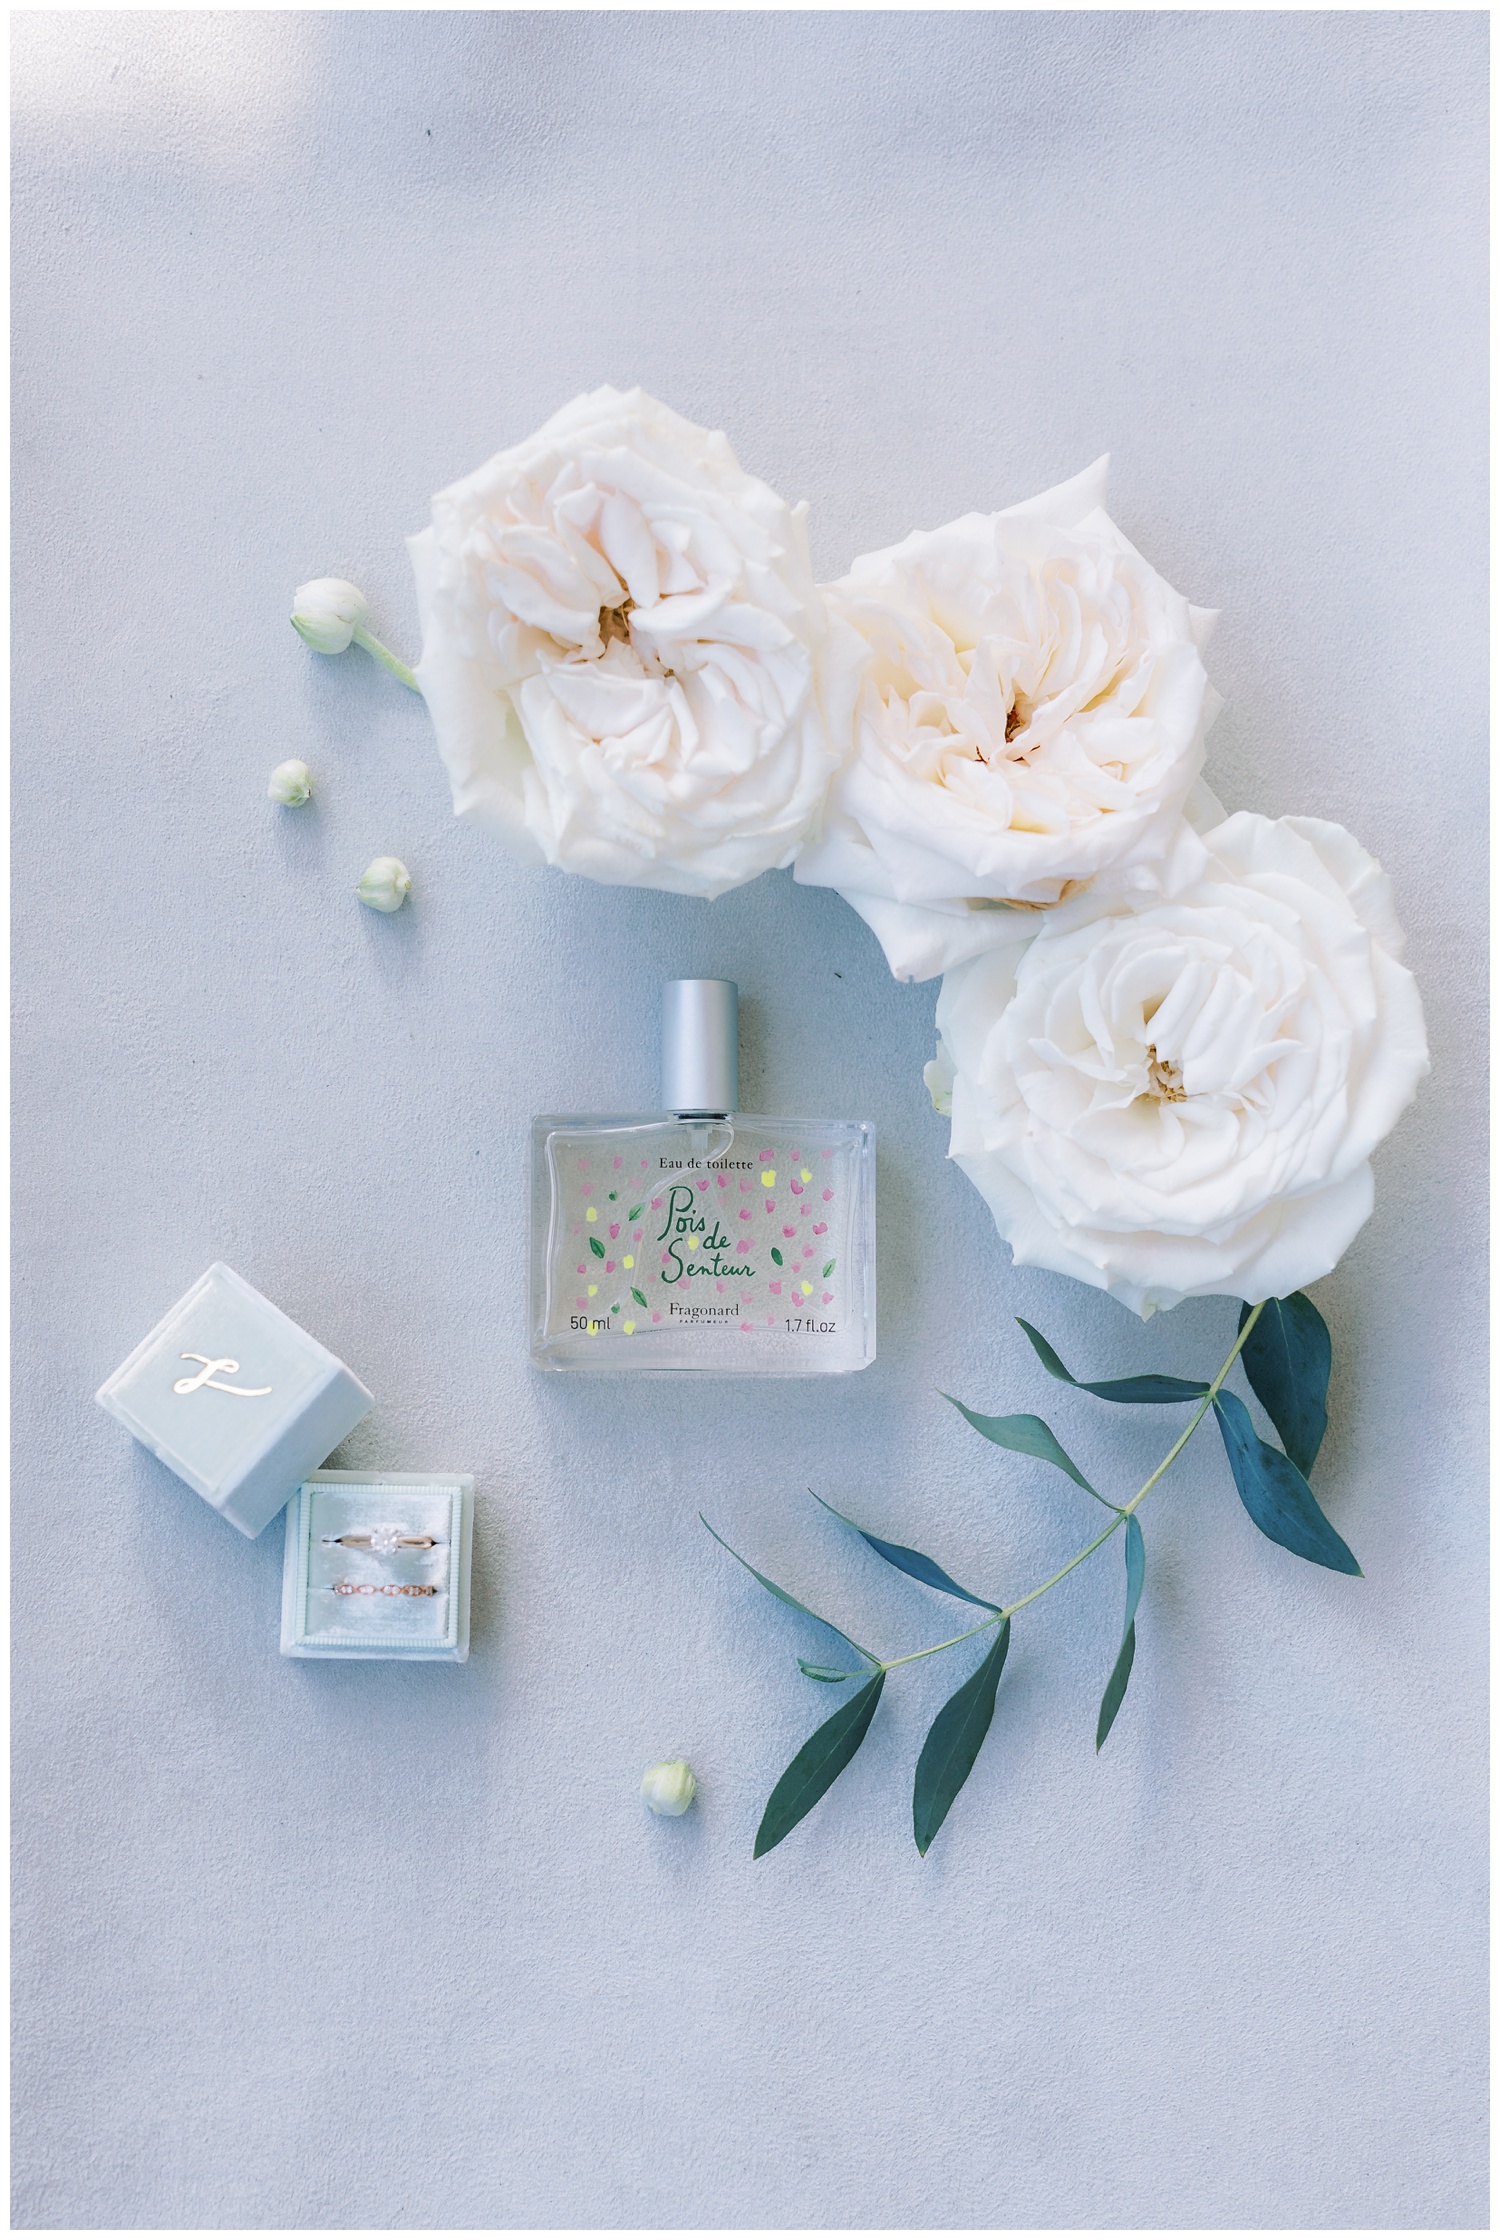 Fragonard perfume with florals and Mrs Box on wedding day